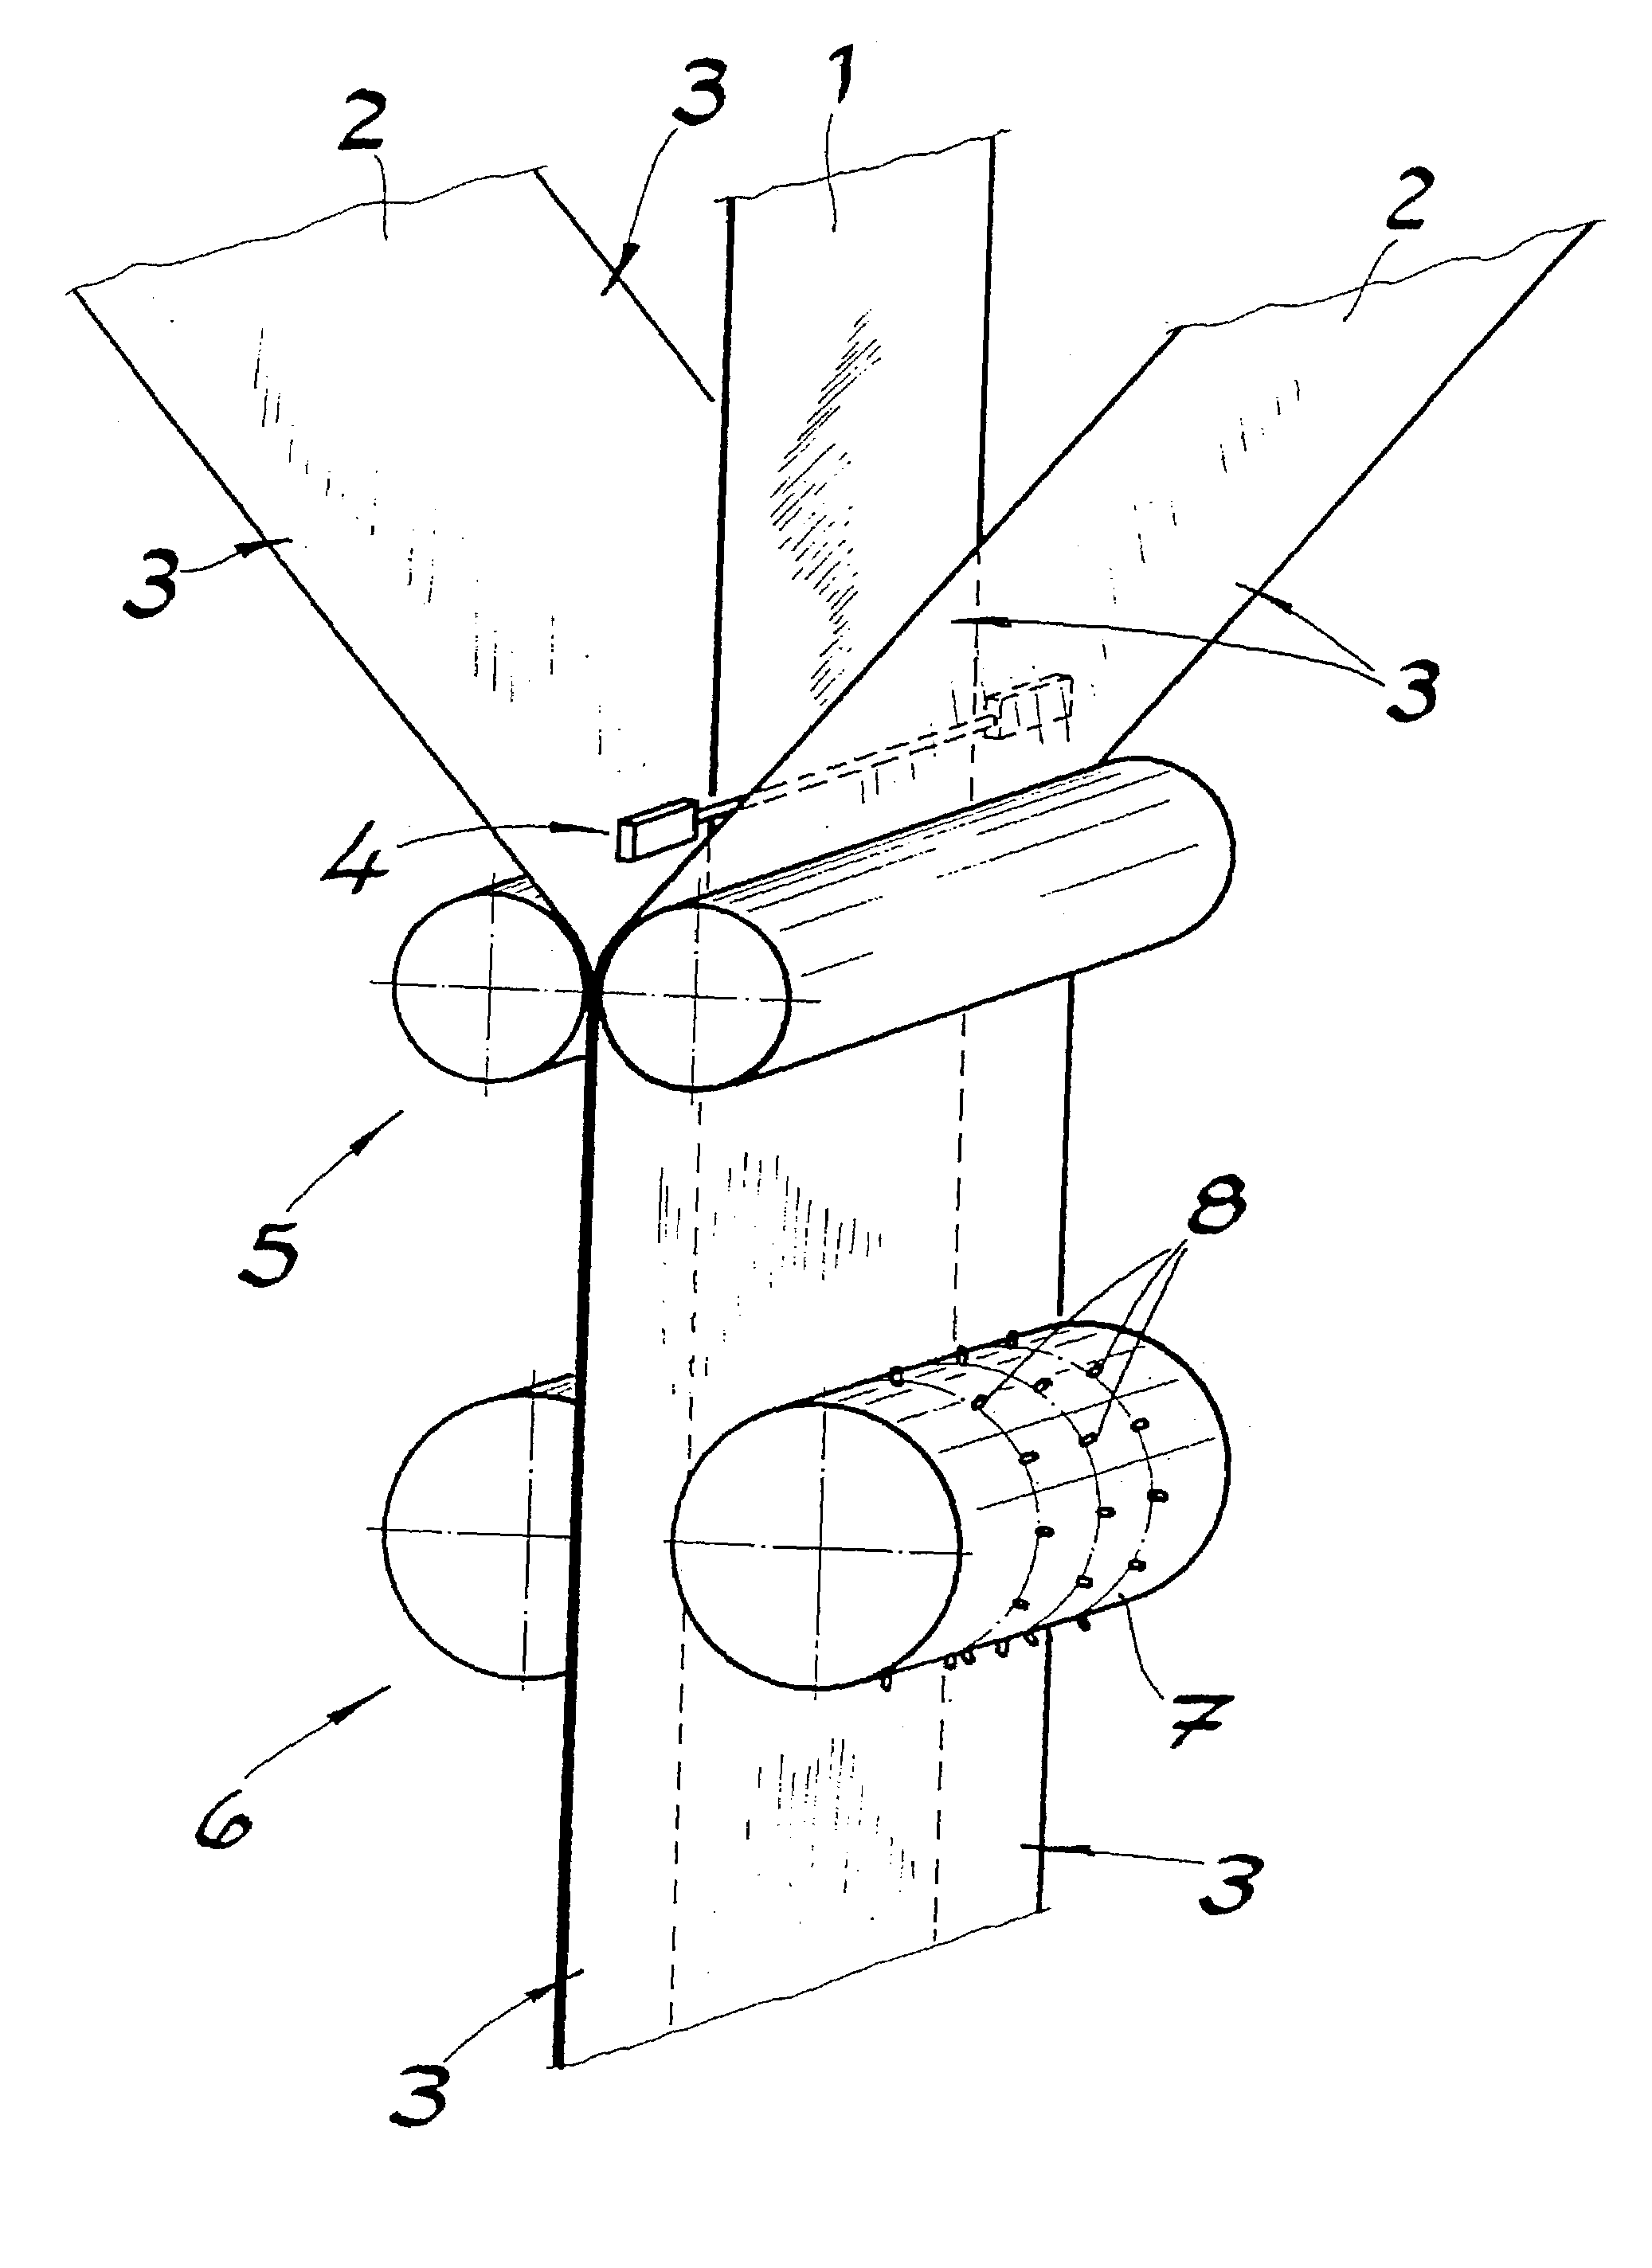 Method for producing an air-permeable laminate film with a textile surface, which has elastic and non-elastic regions